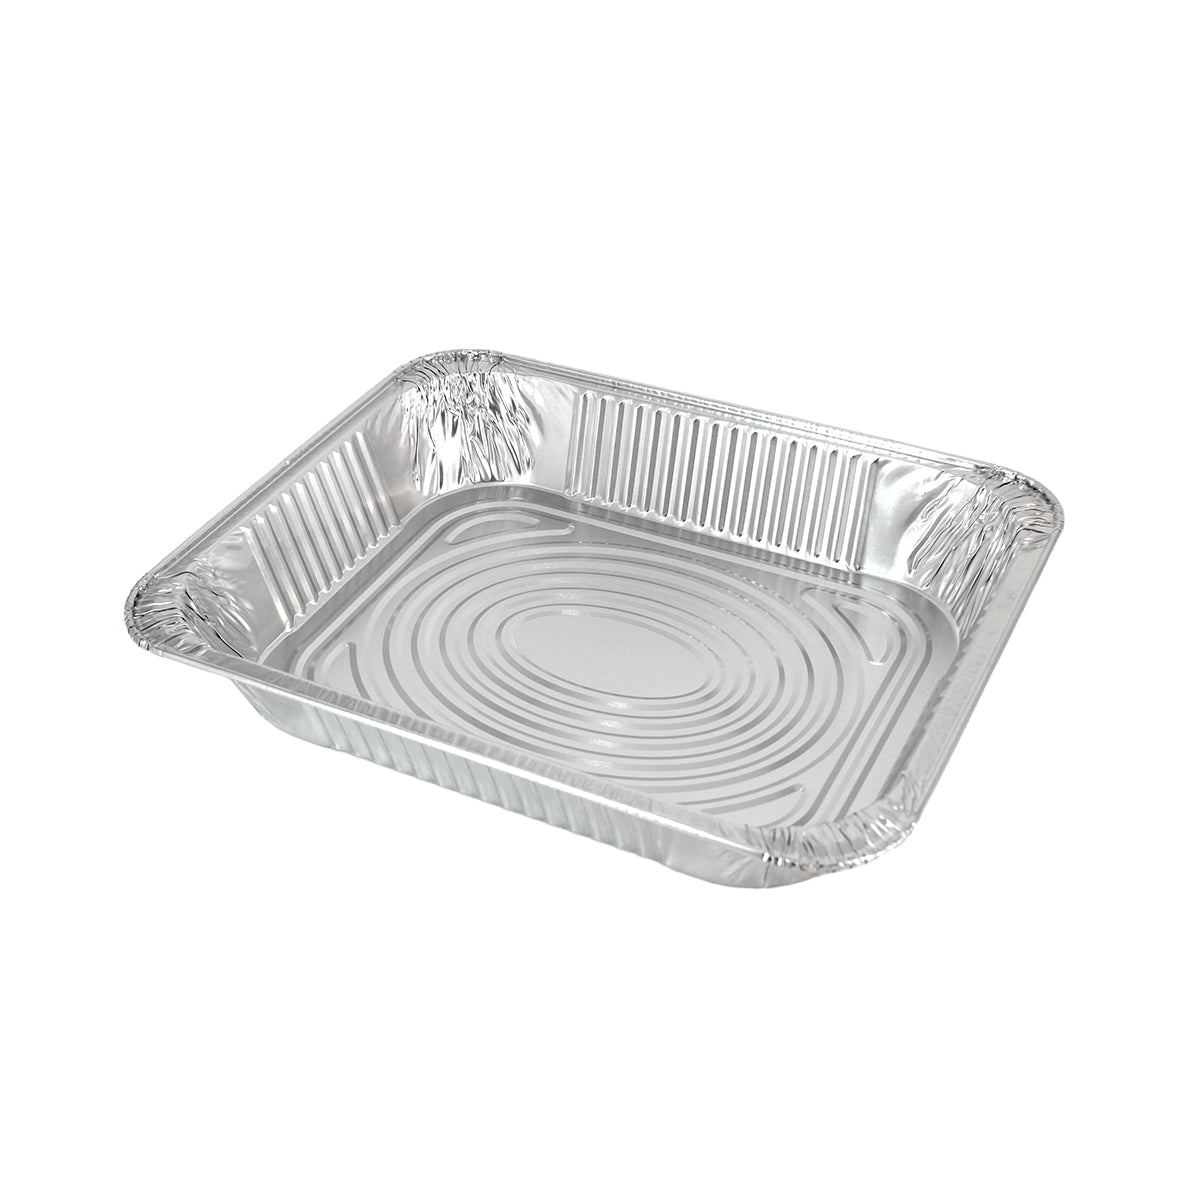 Half Size Deep Steam Pan | Recyclable Aluminum (Case of 100)